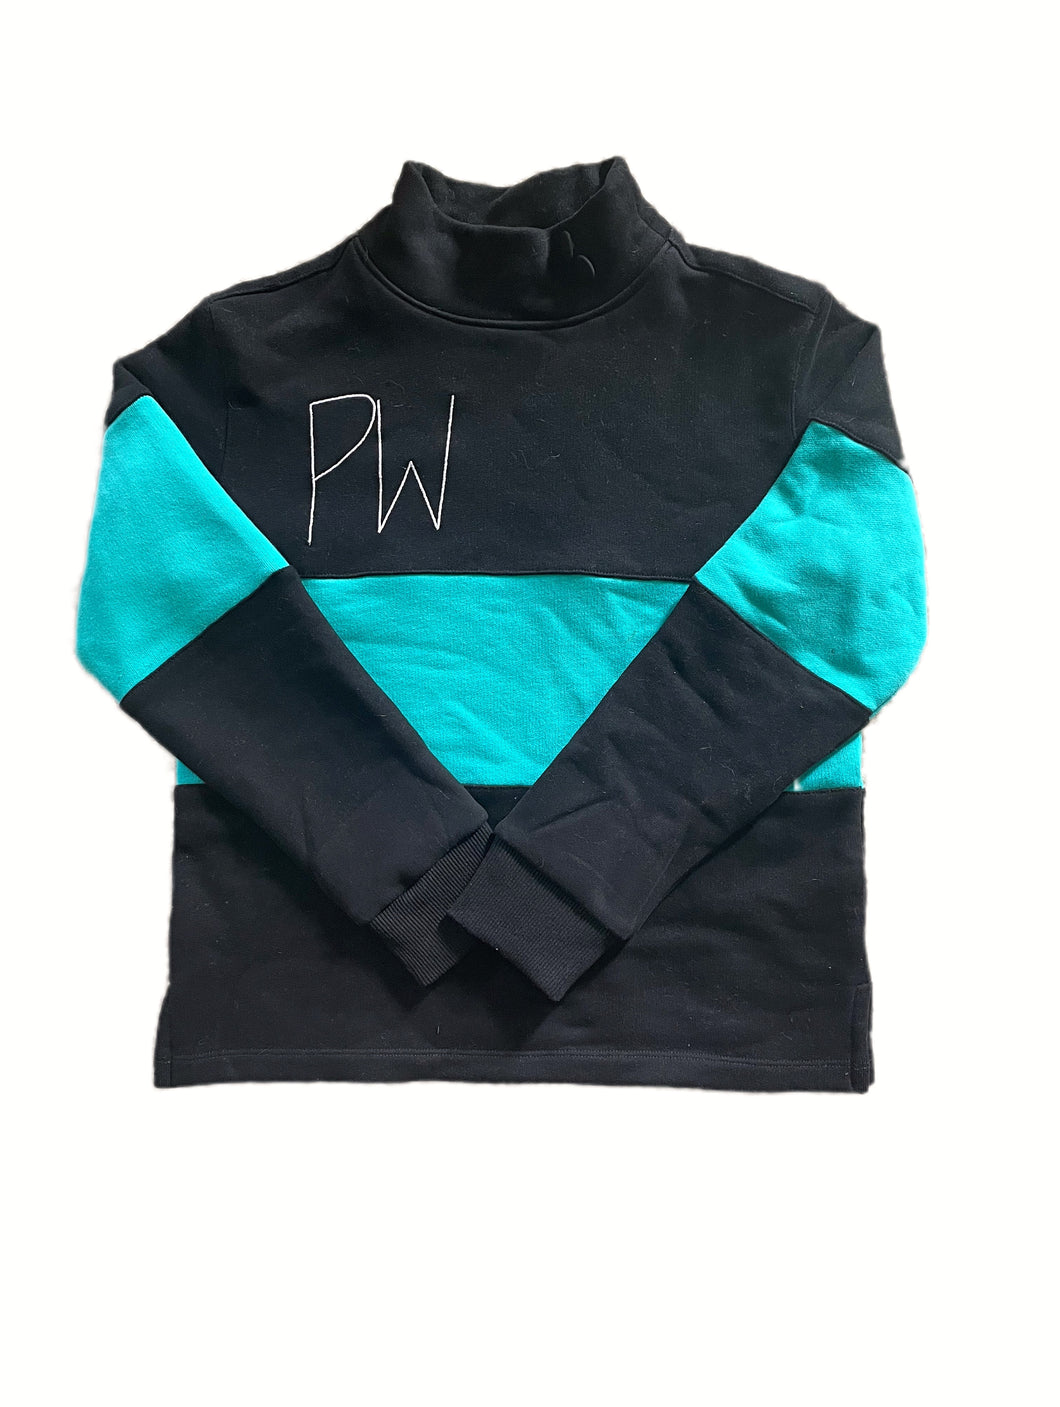 The PW Top